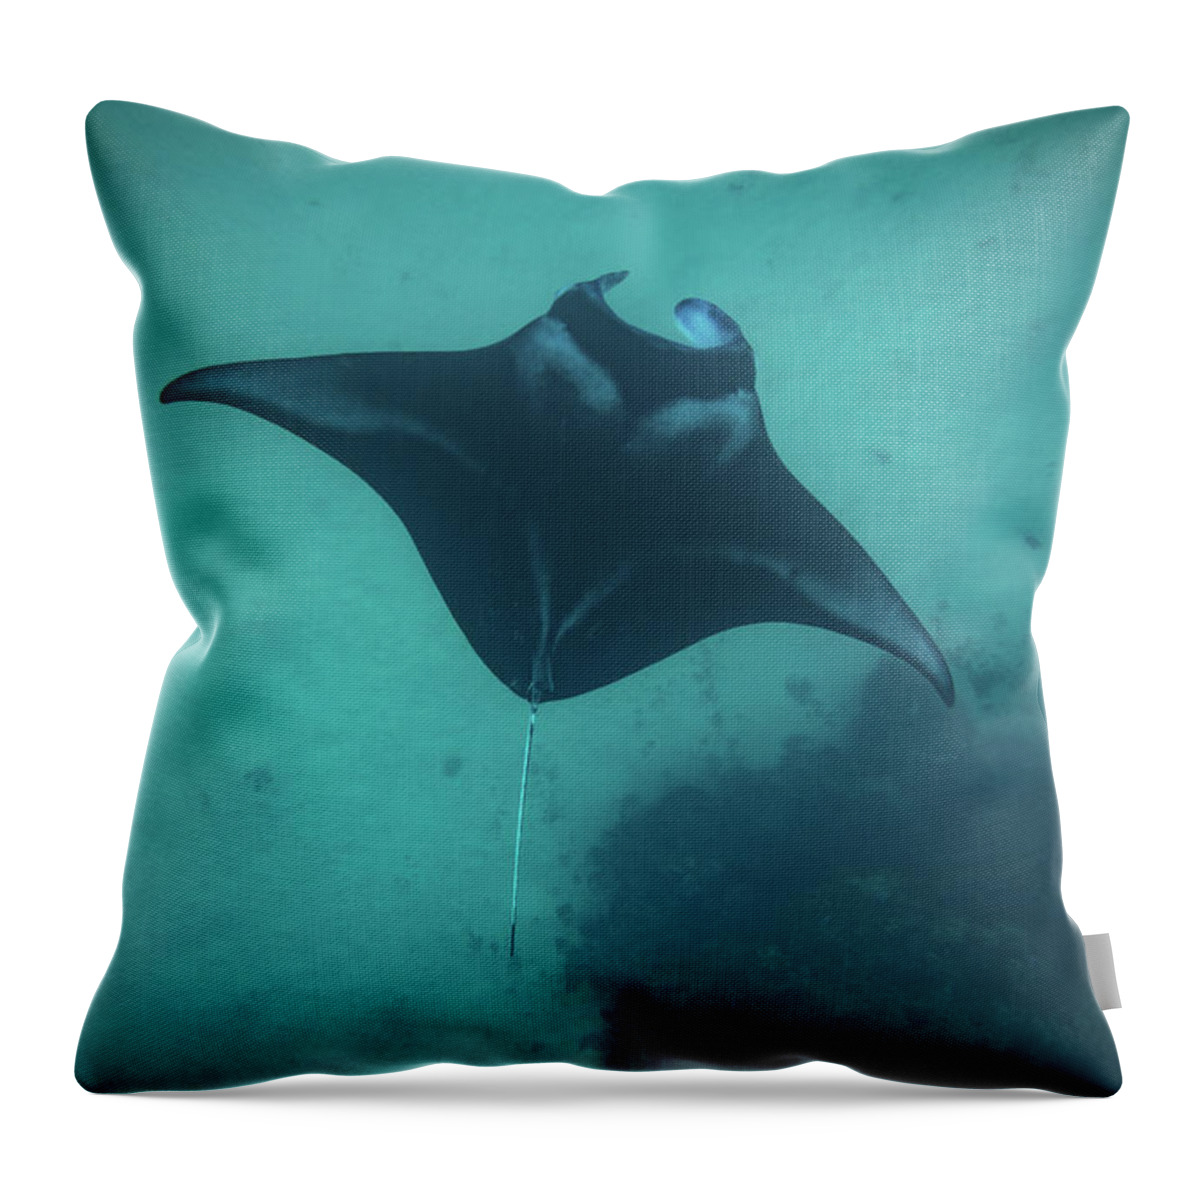 Photography Throw Pillow featuring the photograph Manta Ray Swimming In The Pacific by Panoramic Images